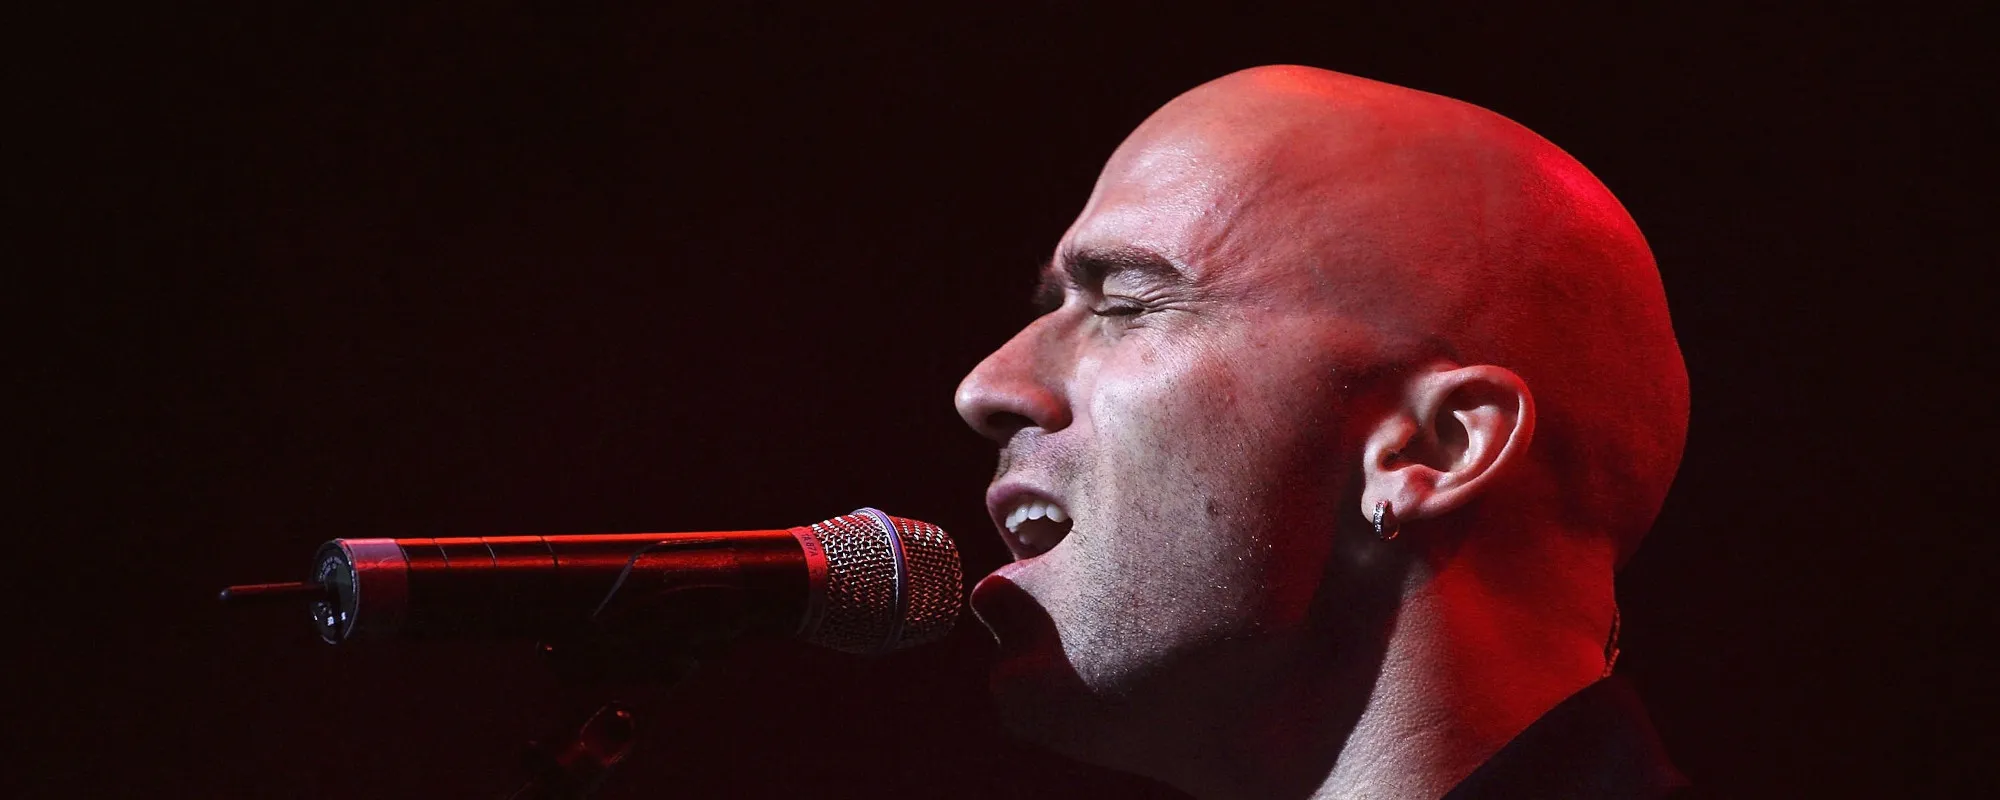 Why Live’s 1994 Hit “Lightning Crashes” is the Song that Keeps on Giving